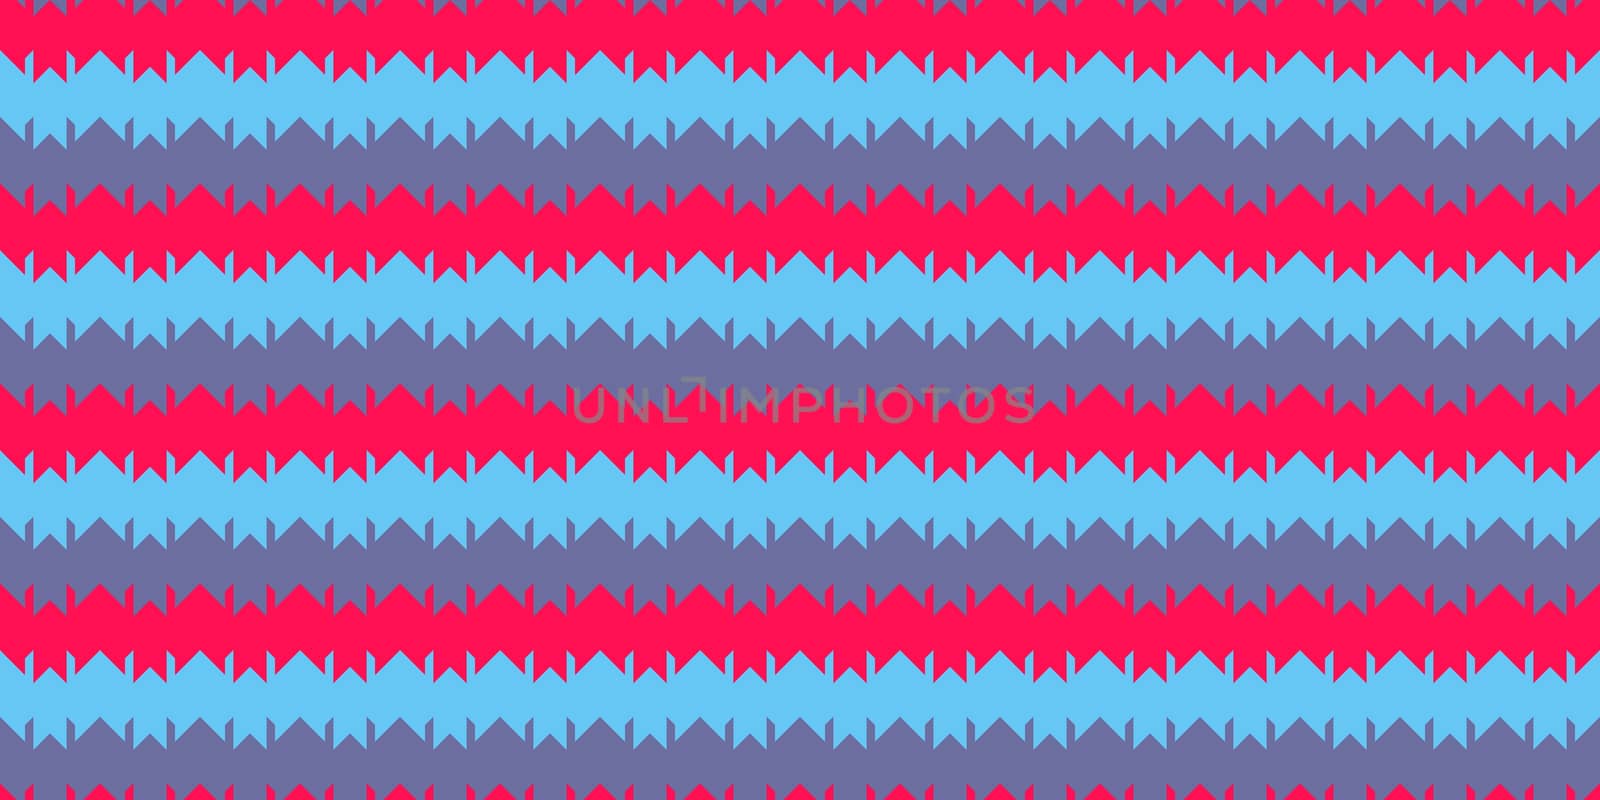 Pink Blue Violet Chevron Geometry Background. Seamless Zigzag Texture. Modern Striped Pattern. by sanches812